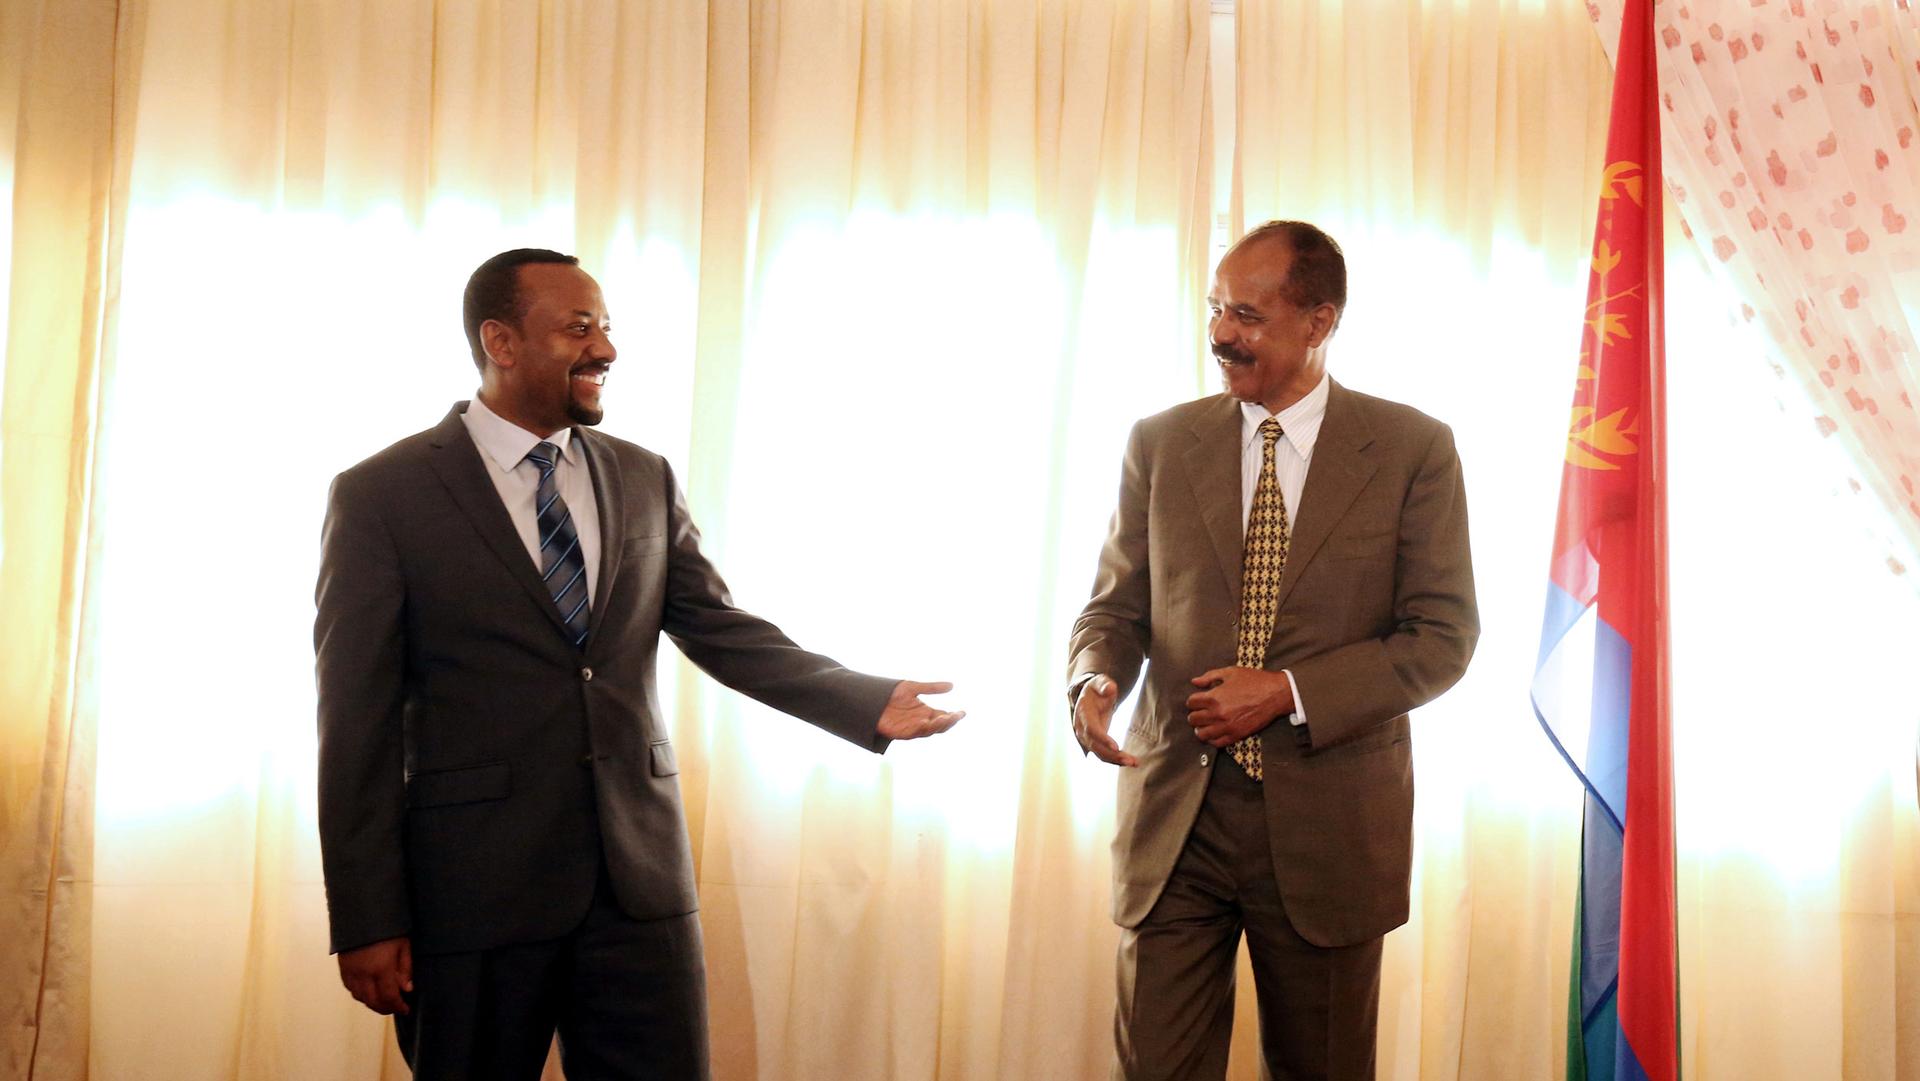 Eritrea's President, Isaias Afwerki, talks to Ethiopia's Prime Minister, Abiy Ahmed during the Inauguration ceremony marking the reopening of the Eritrean Embassy in Addis Ababa, Ethiopia, on July 16, 2018.